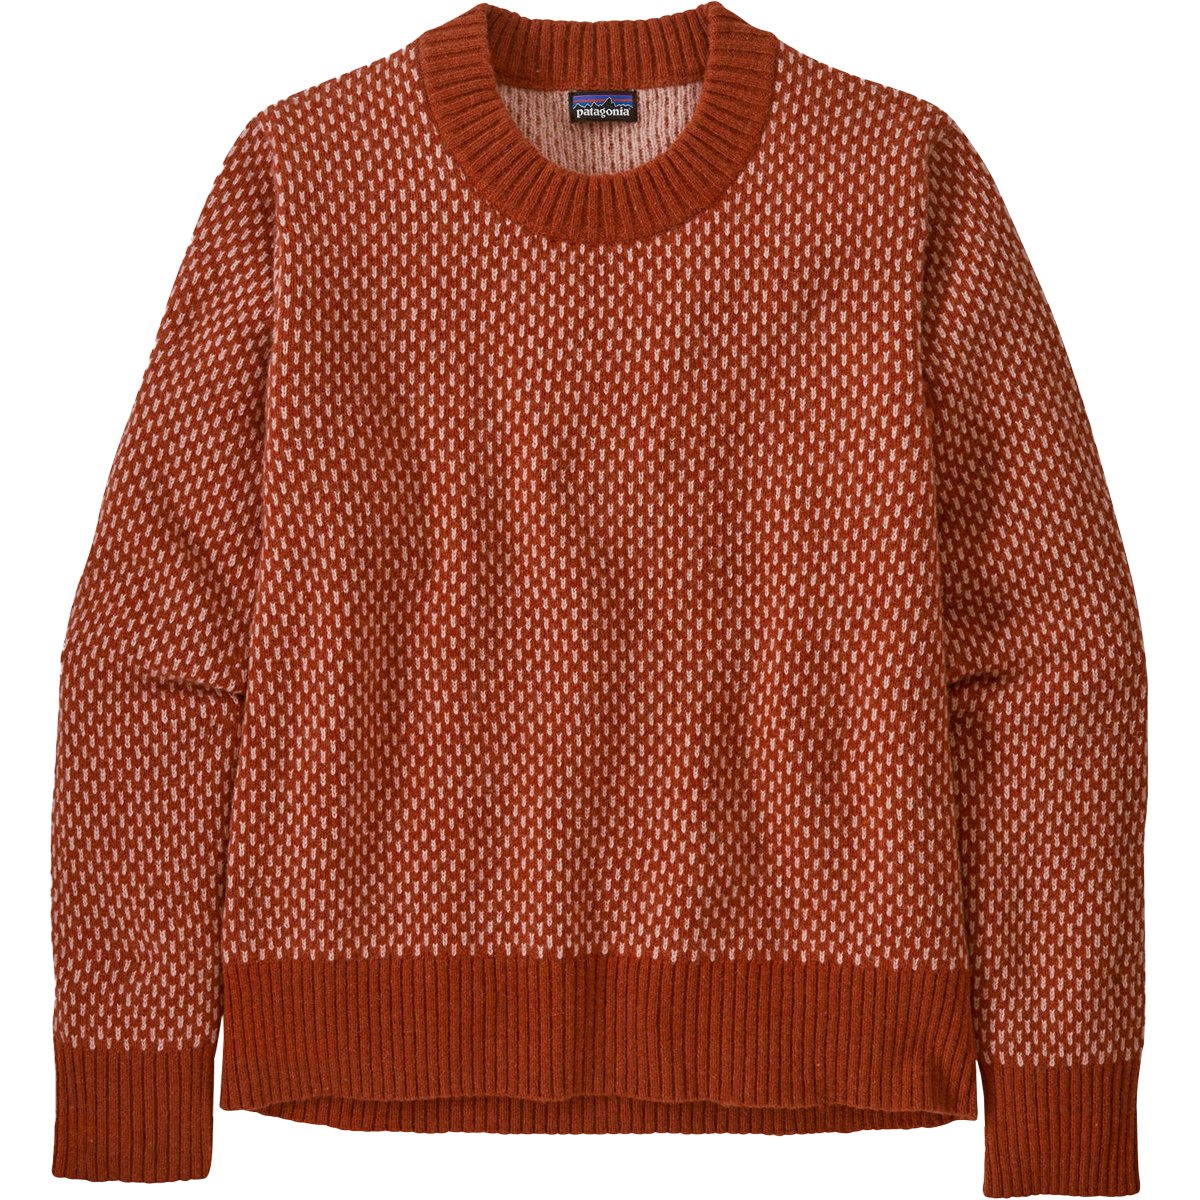 Women's Recycled Wool-Blend Crewneck Sweater alternate view